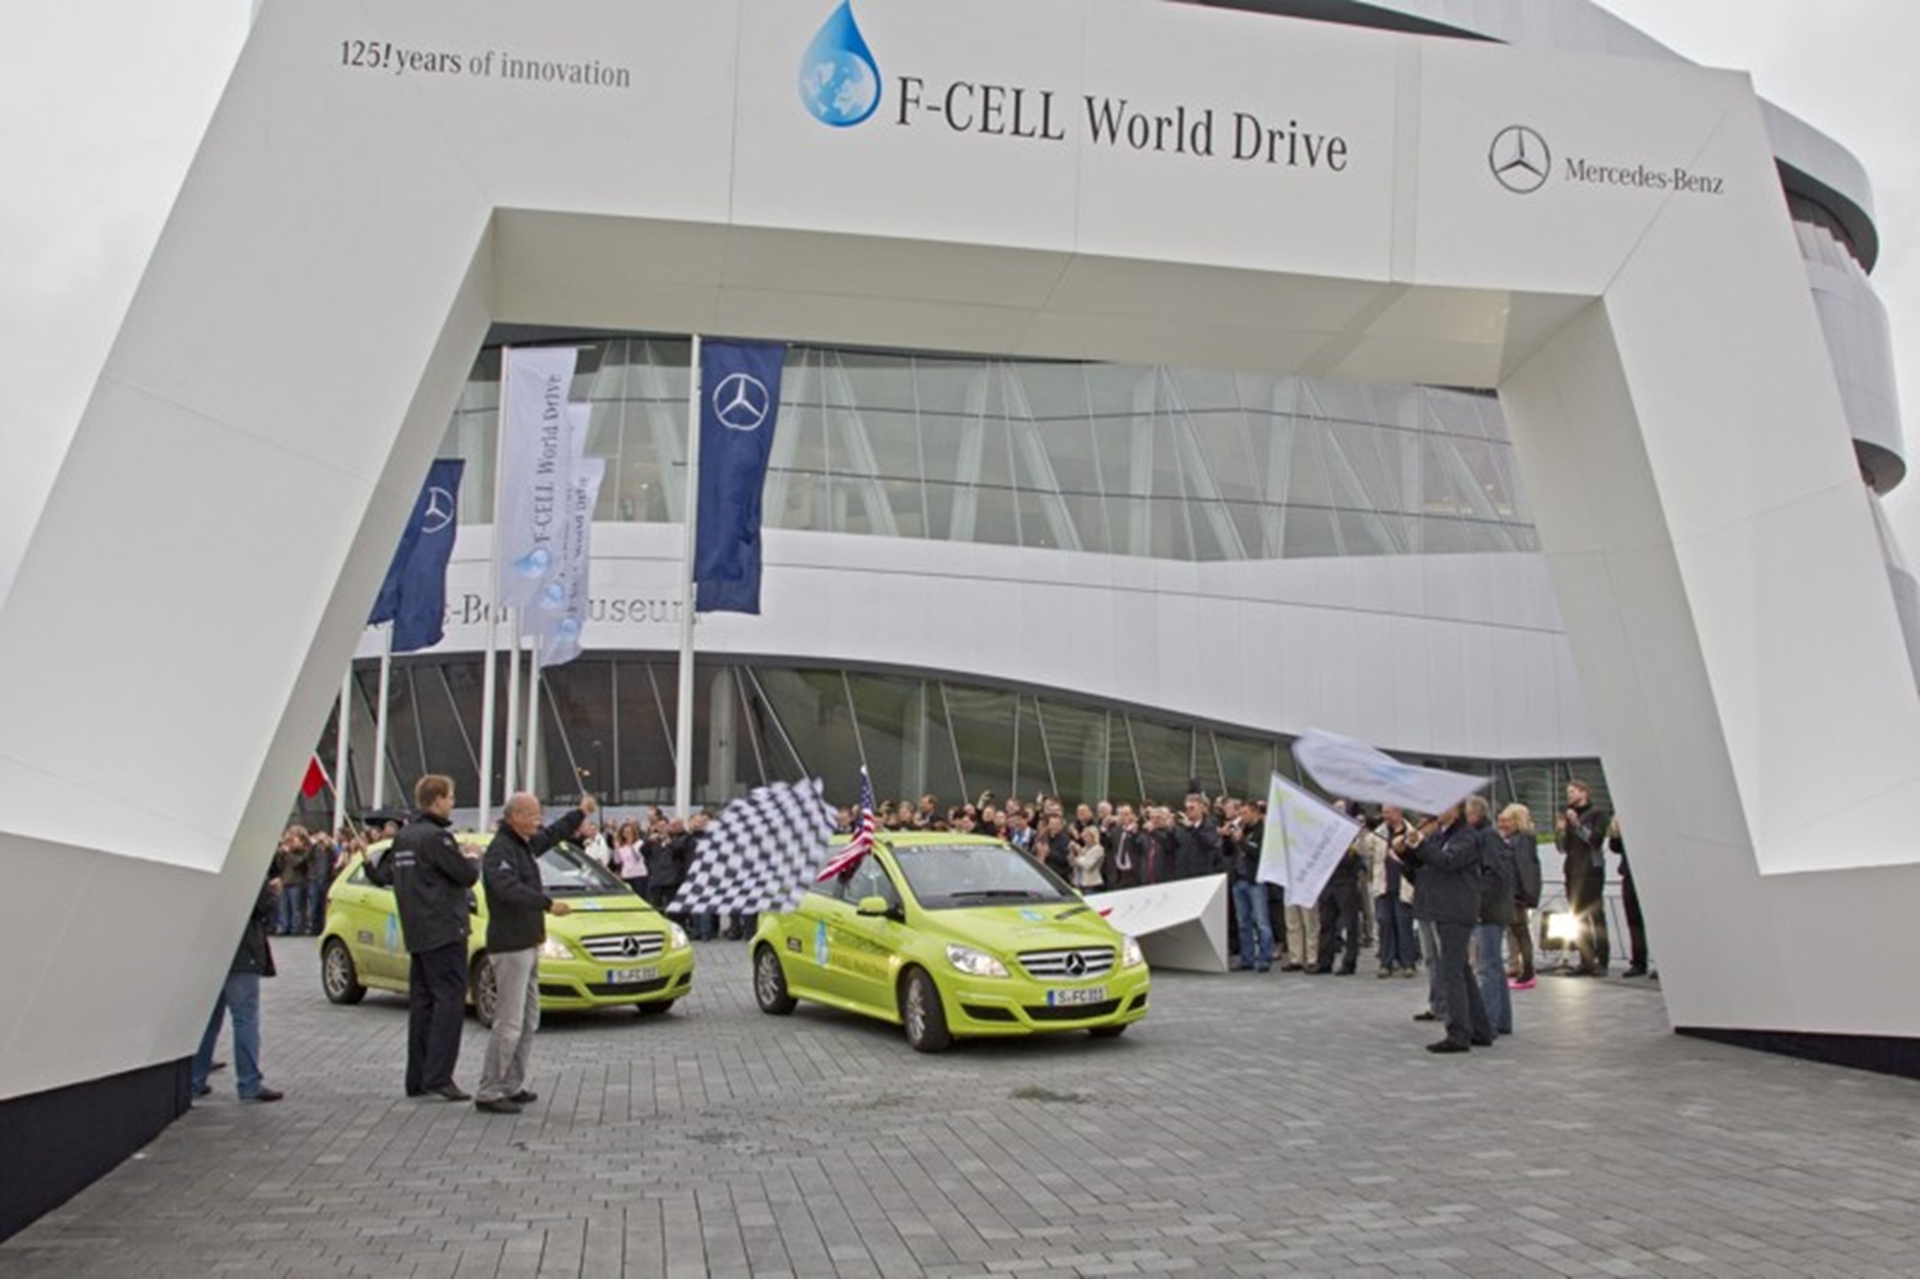 Mercedes-Benz: Leading Sustainable Mobility